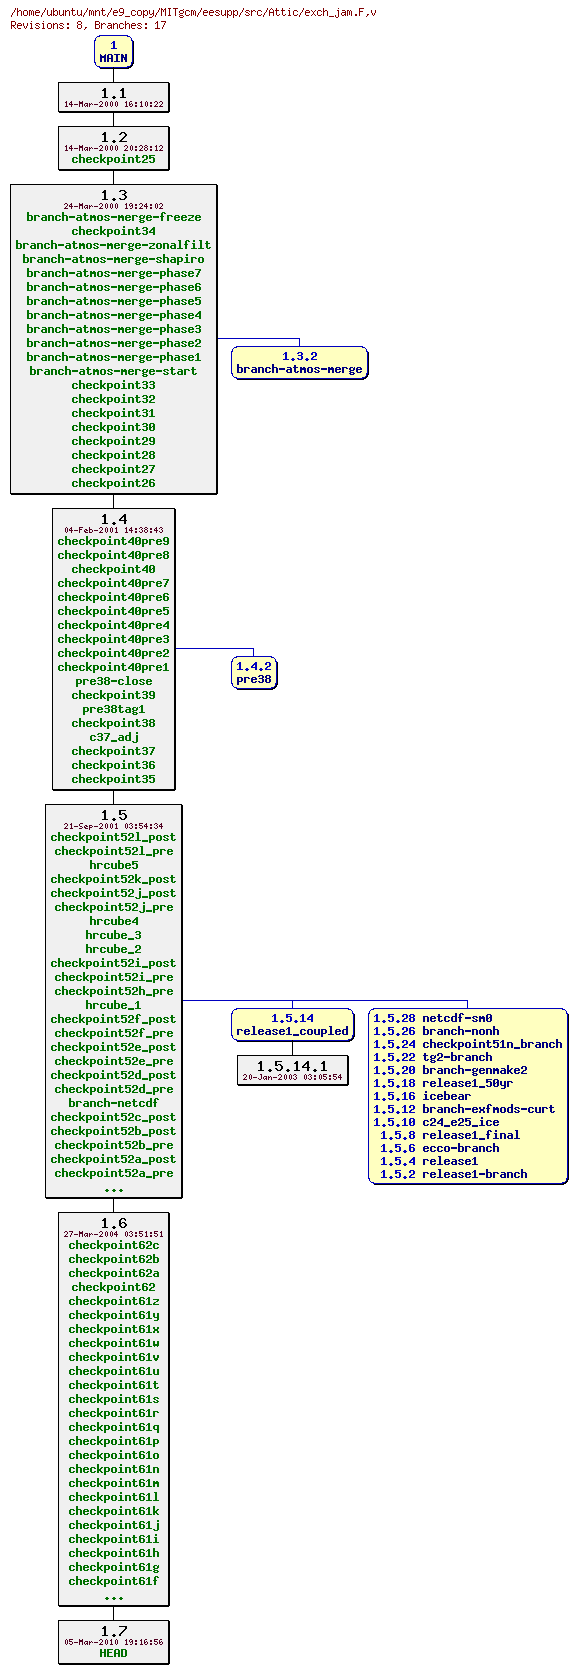 Revisions of MITgcm/eesupp/src/exch_jam.F